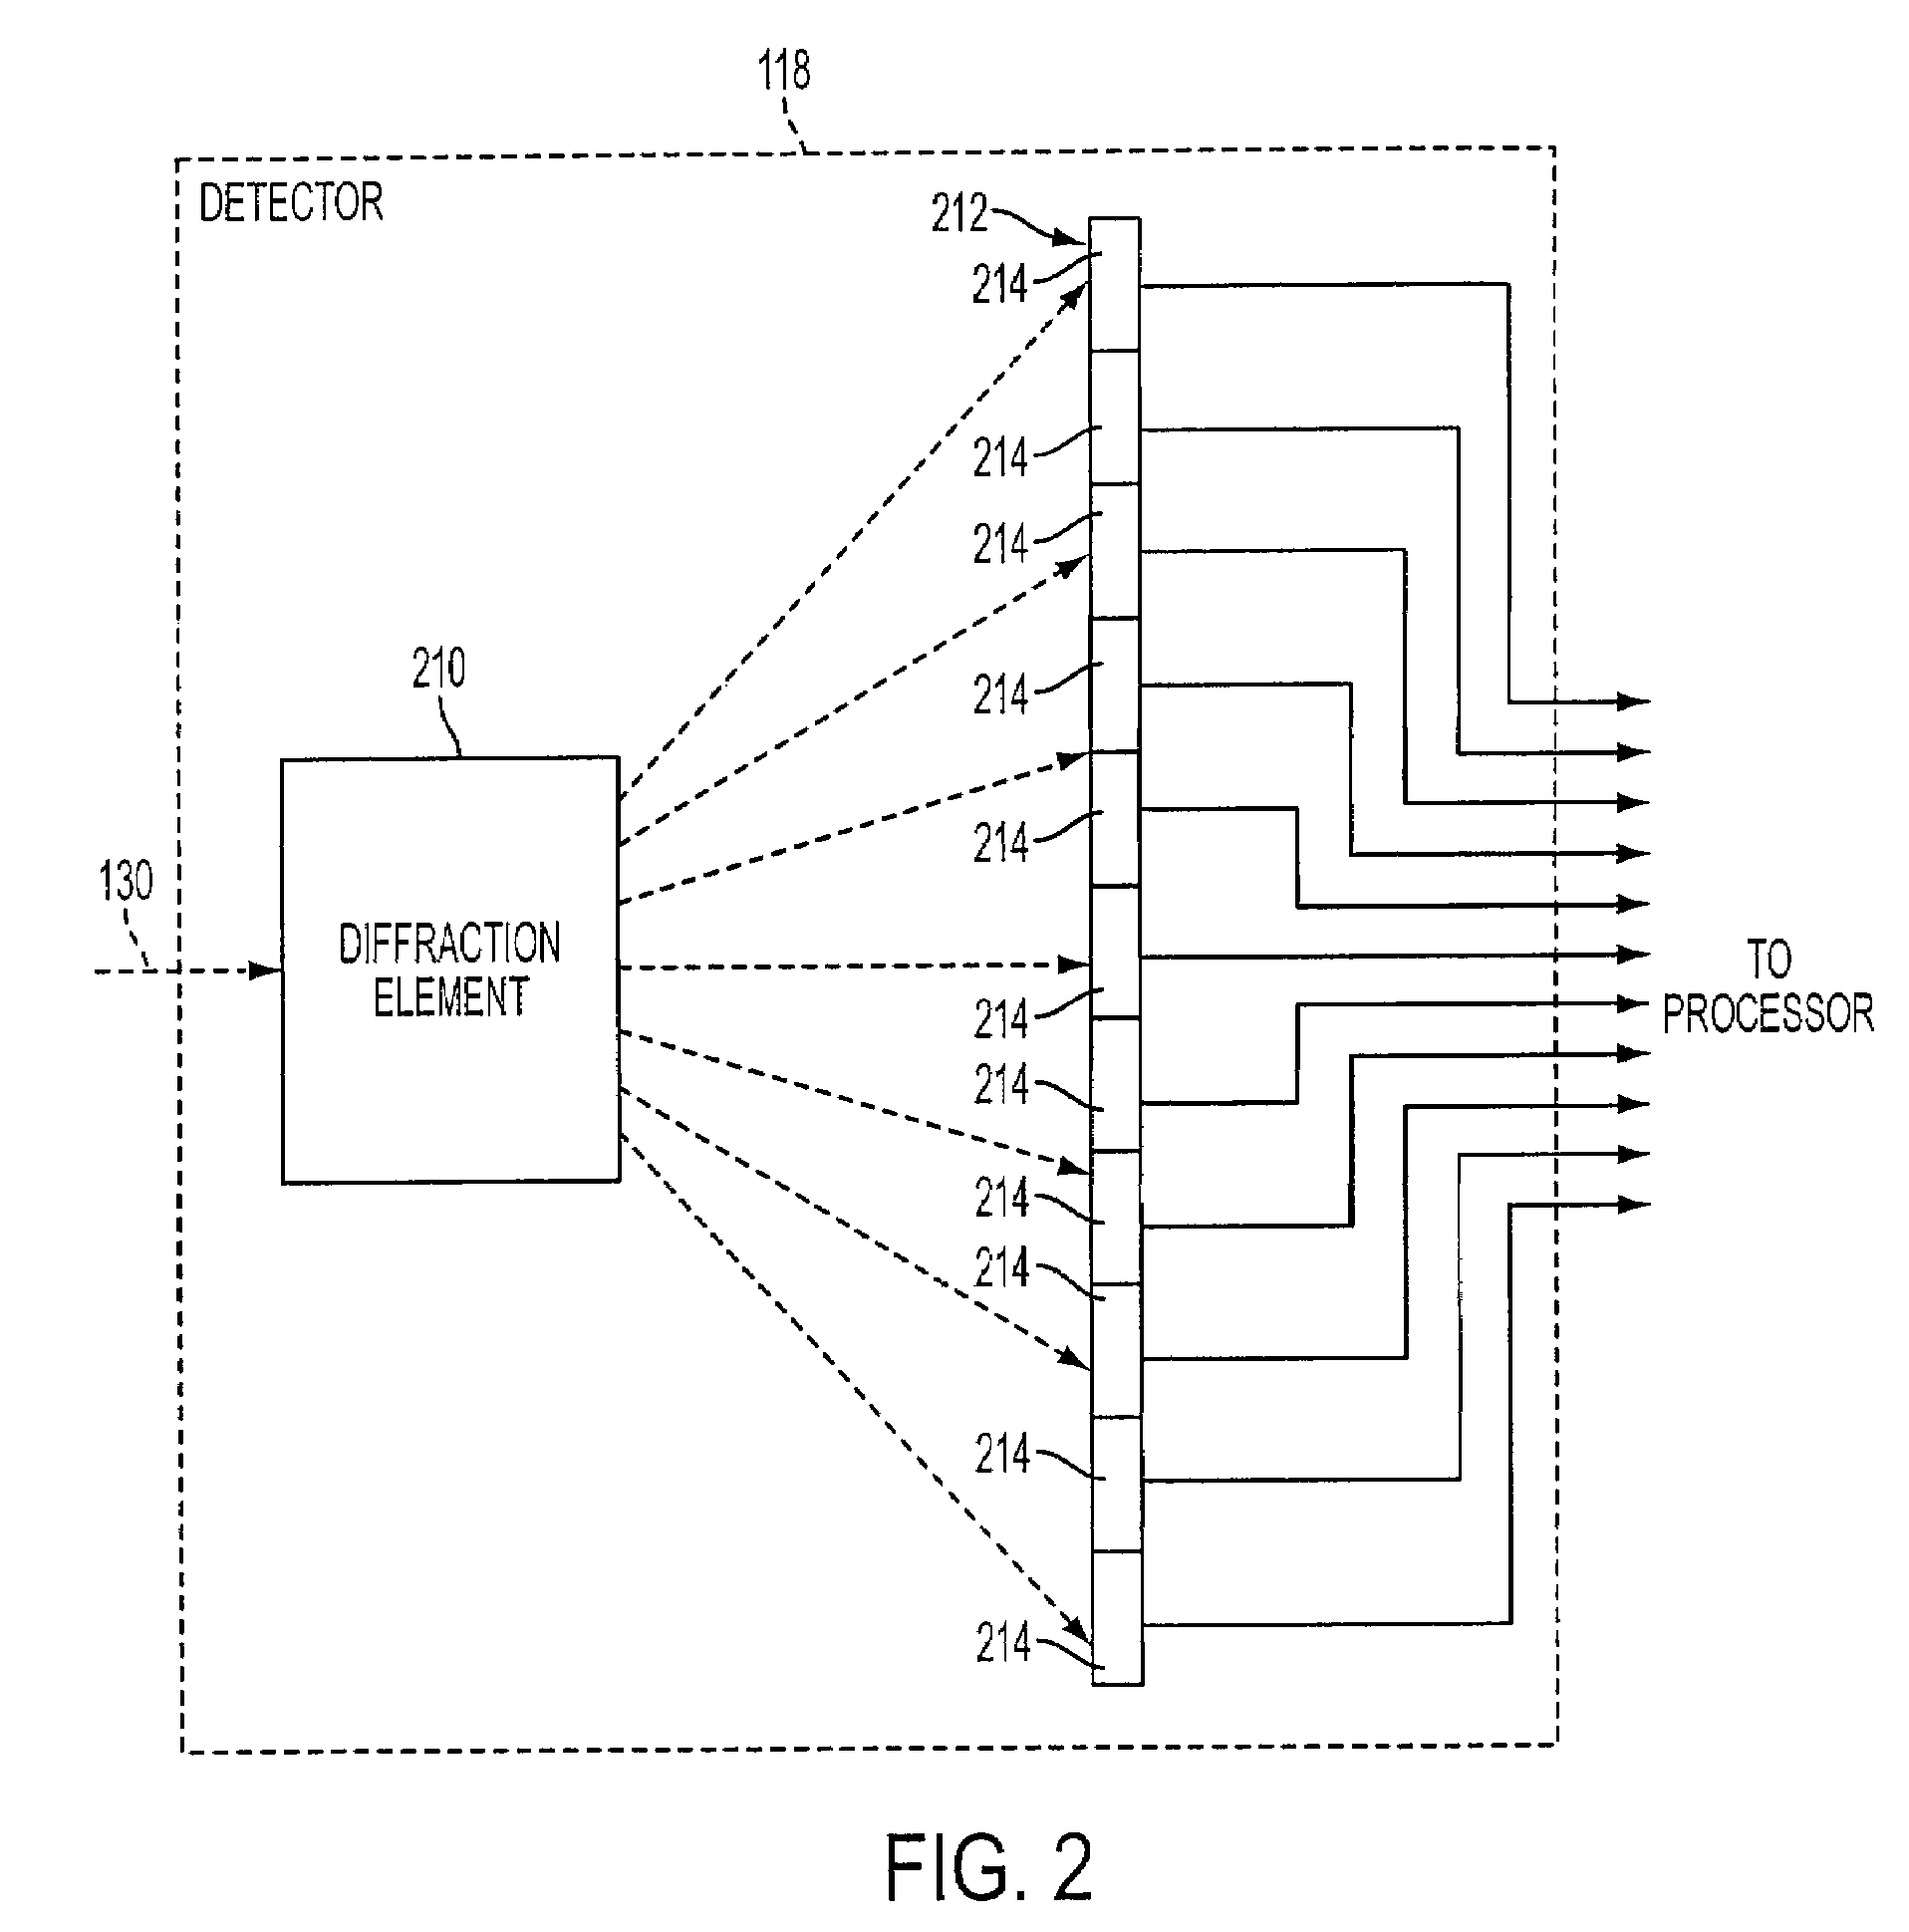 Remote emissions sensing system and method incorporating spectral matching by data interpolation